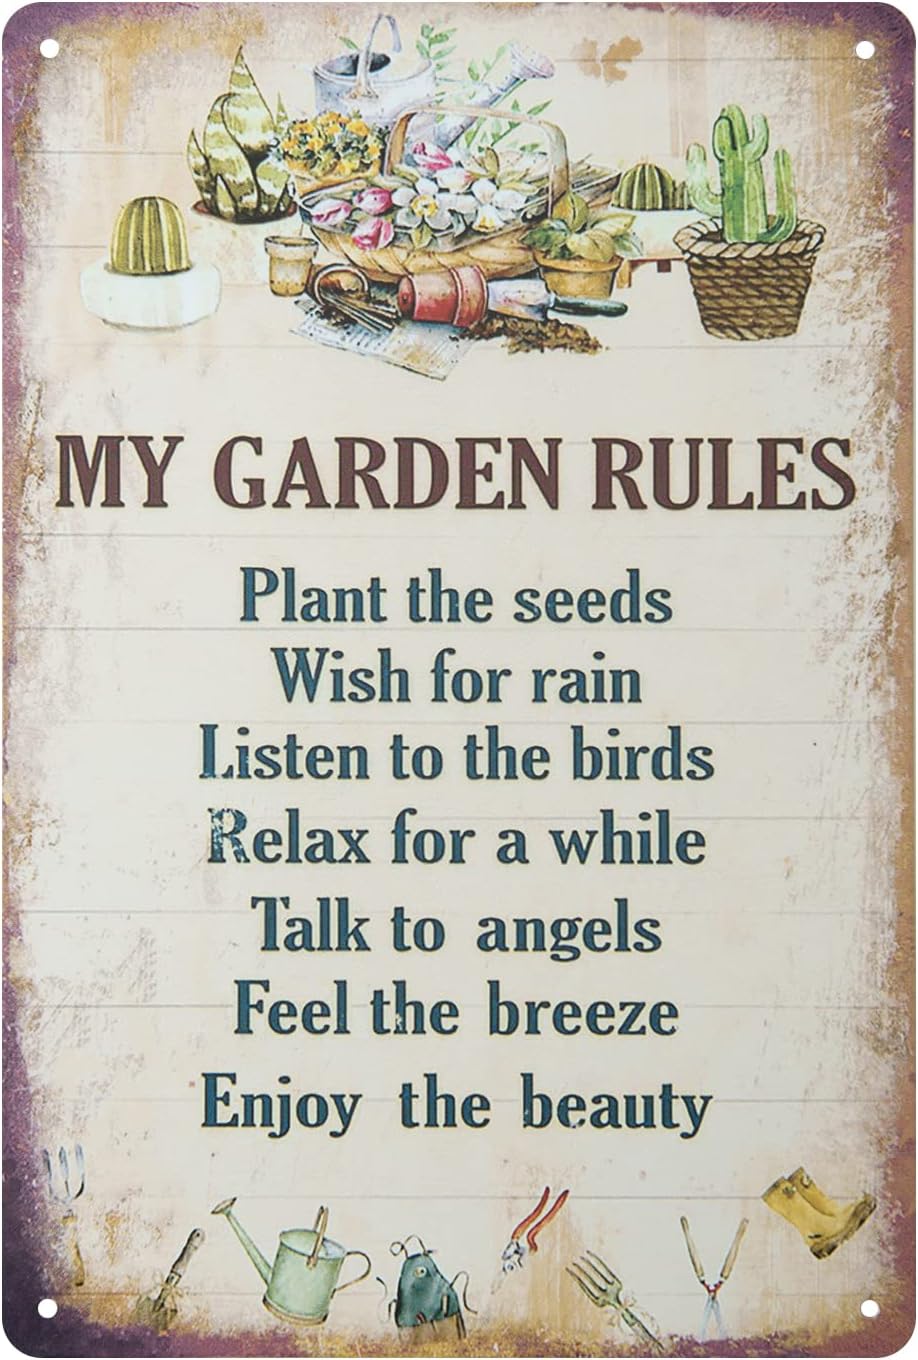 My Garden Rules Metal Tin Sign Vintage Wall Decoration, 8 x 12 inch